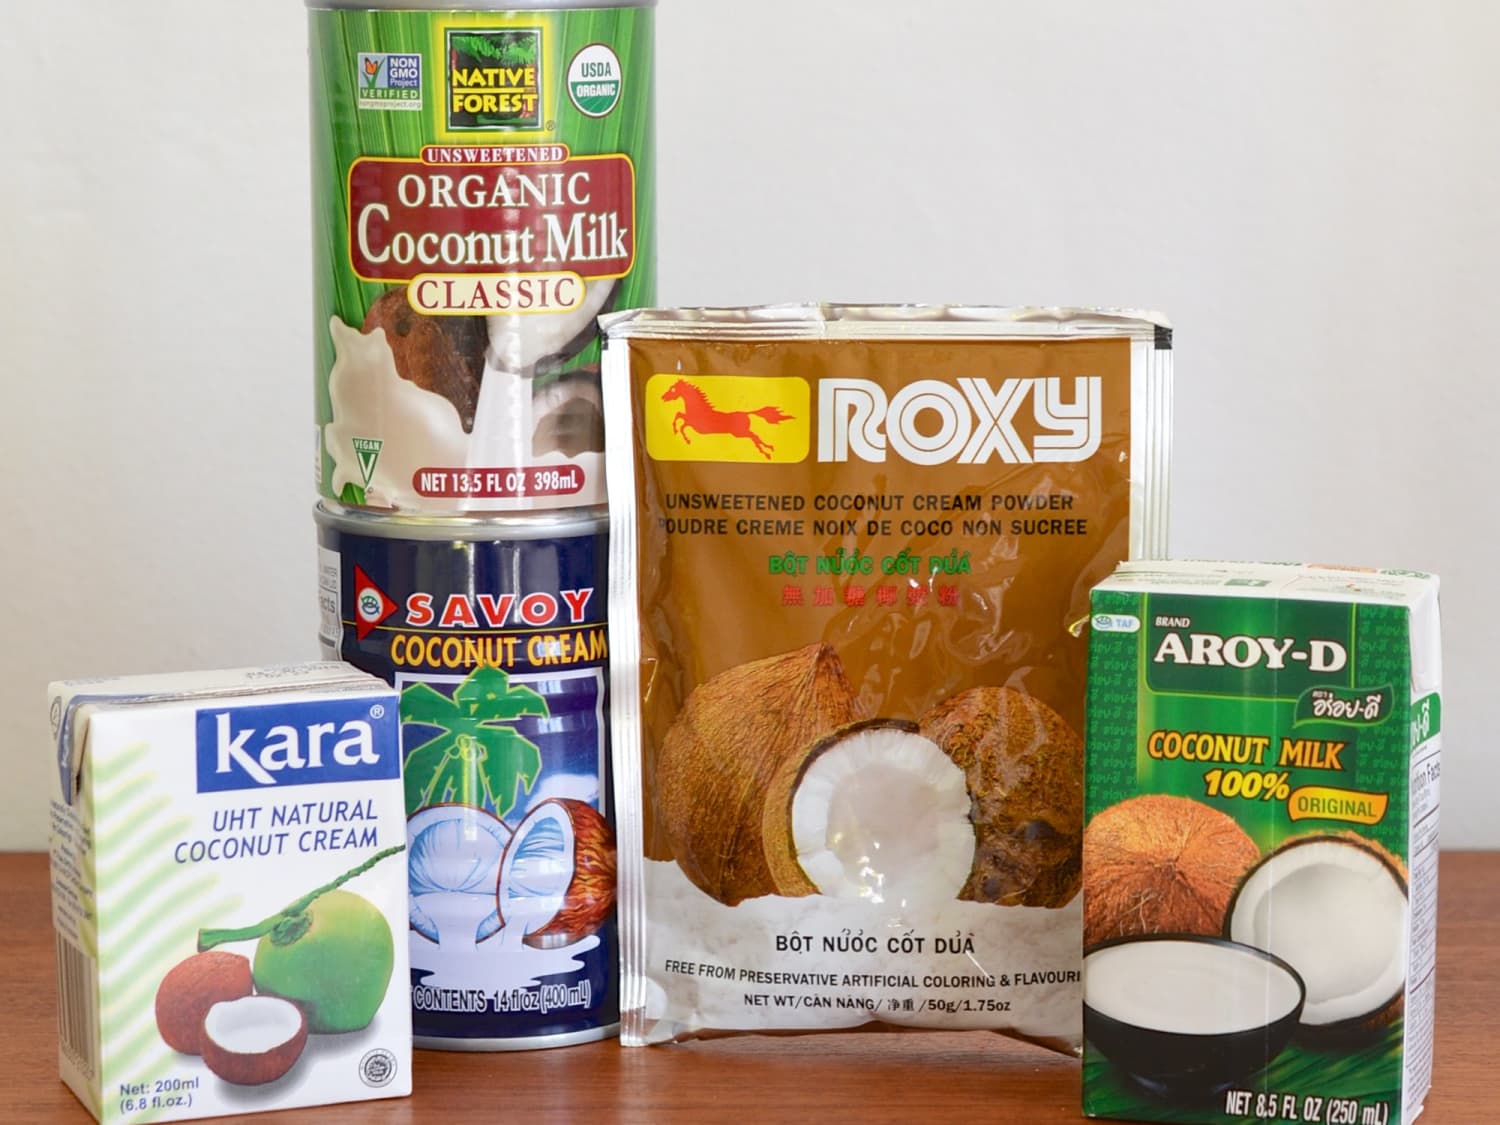 What's the Difference Between Boxed, Canned, and Powdered Coconut Milk?